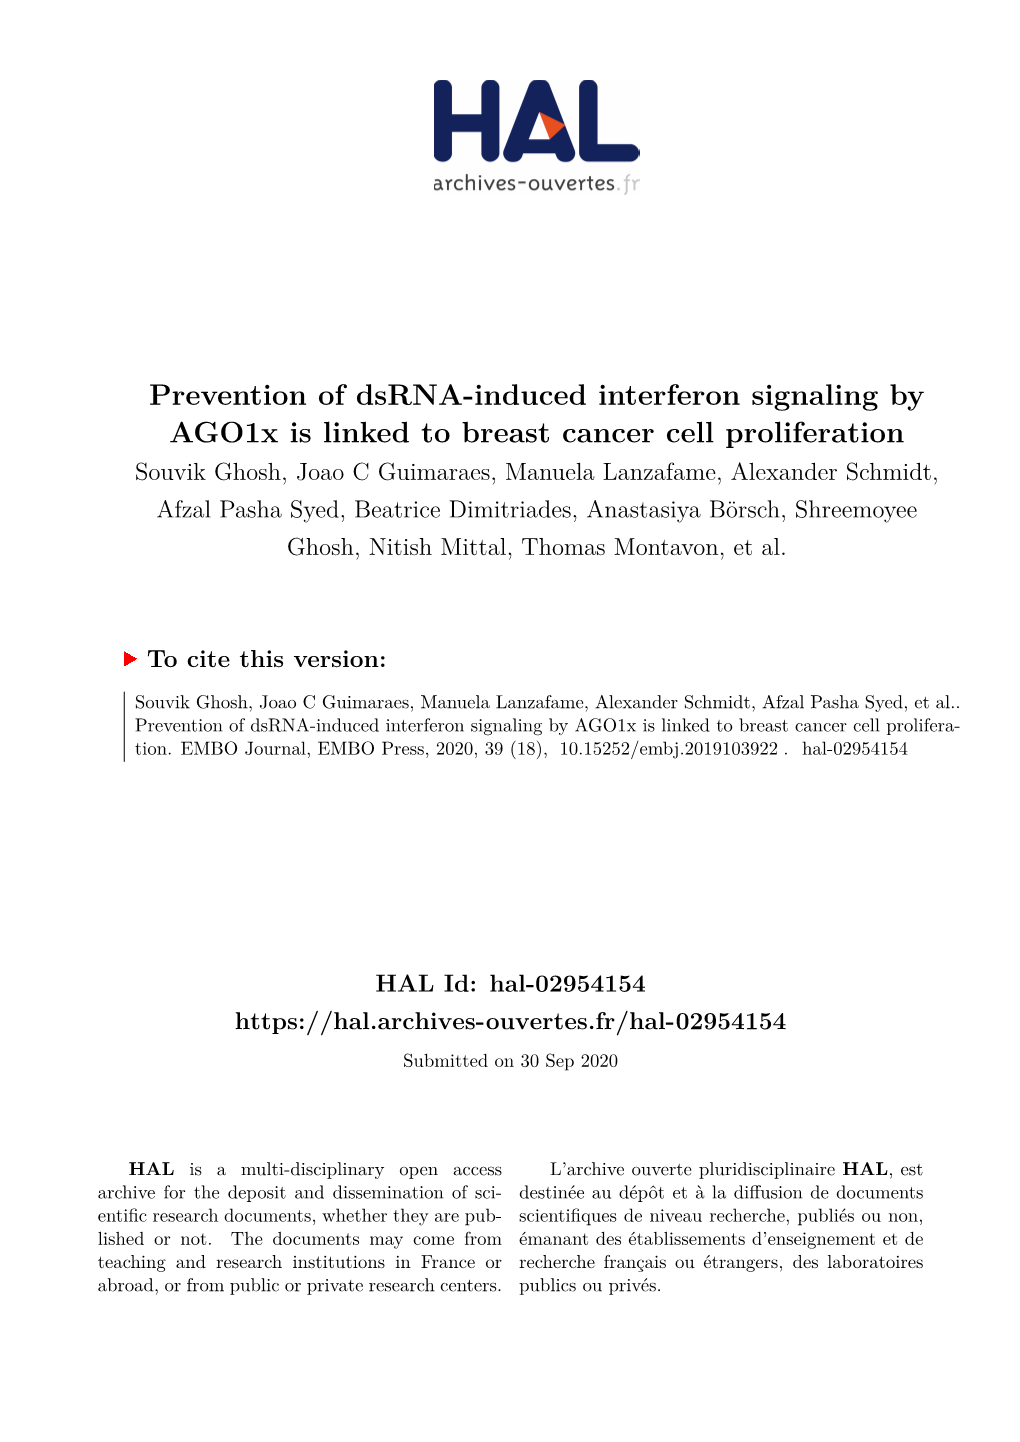 Prevention of Dsrna-Induced Interferon Signaling by Ago1x Is